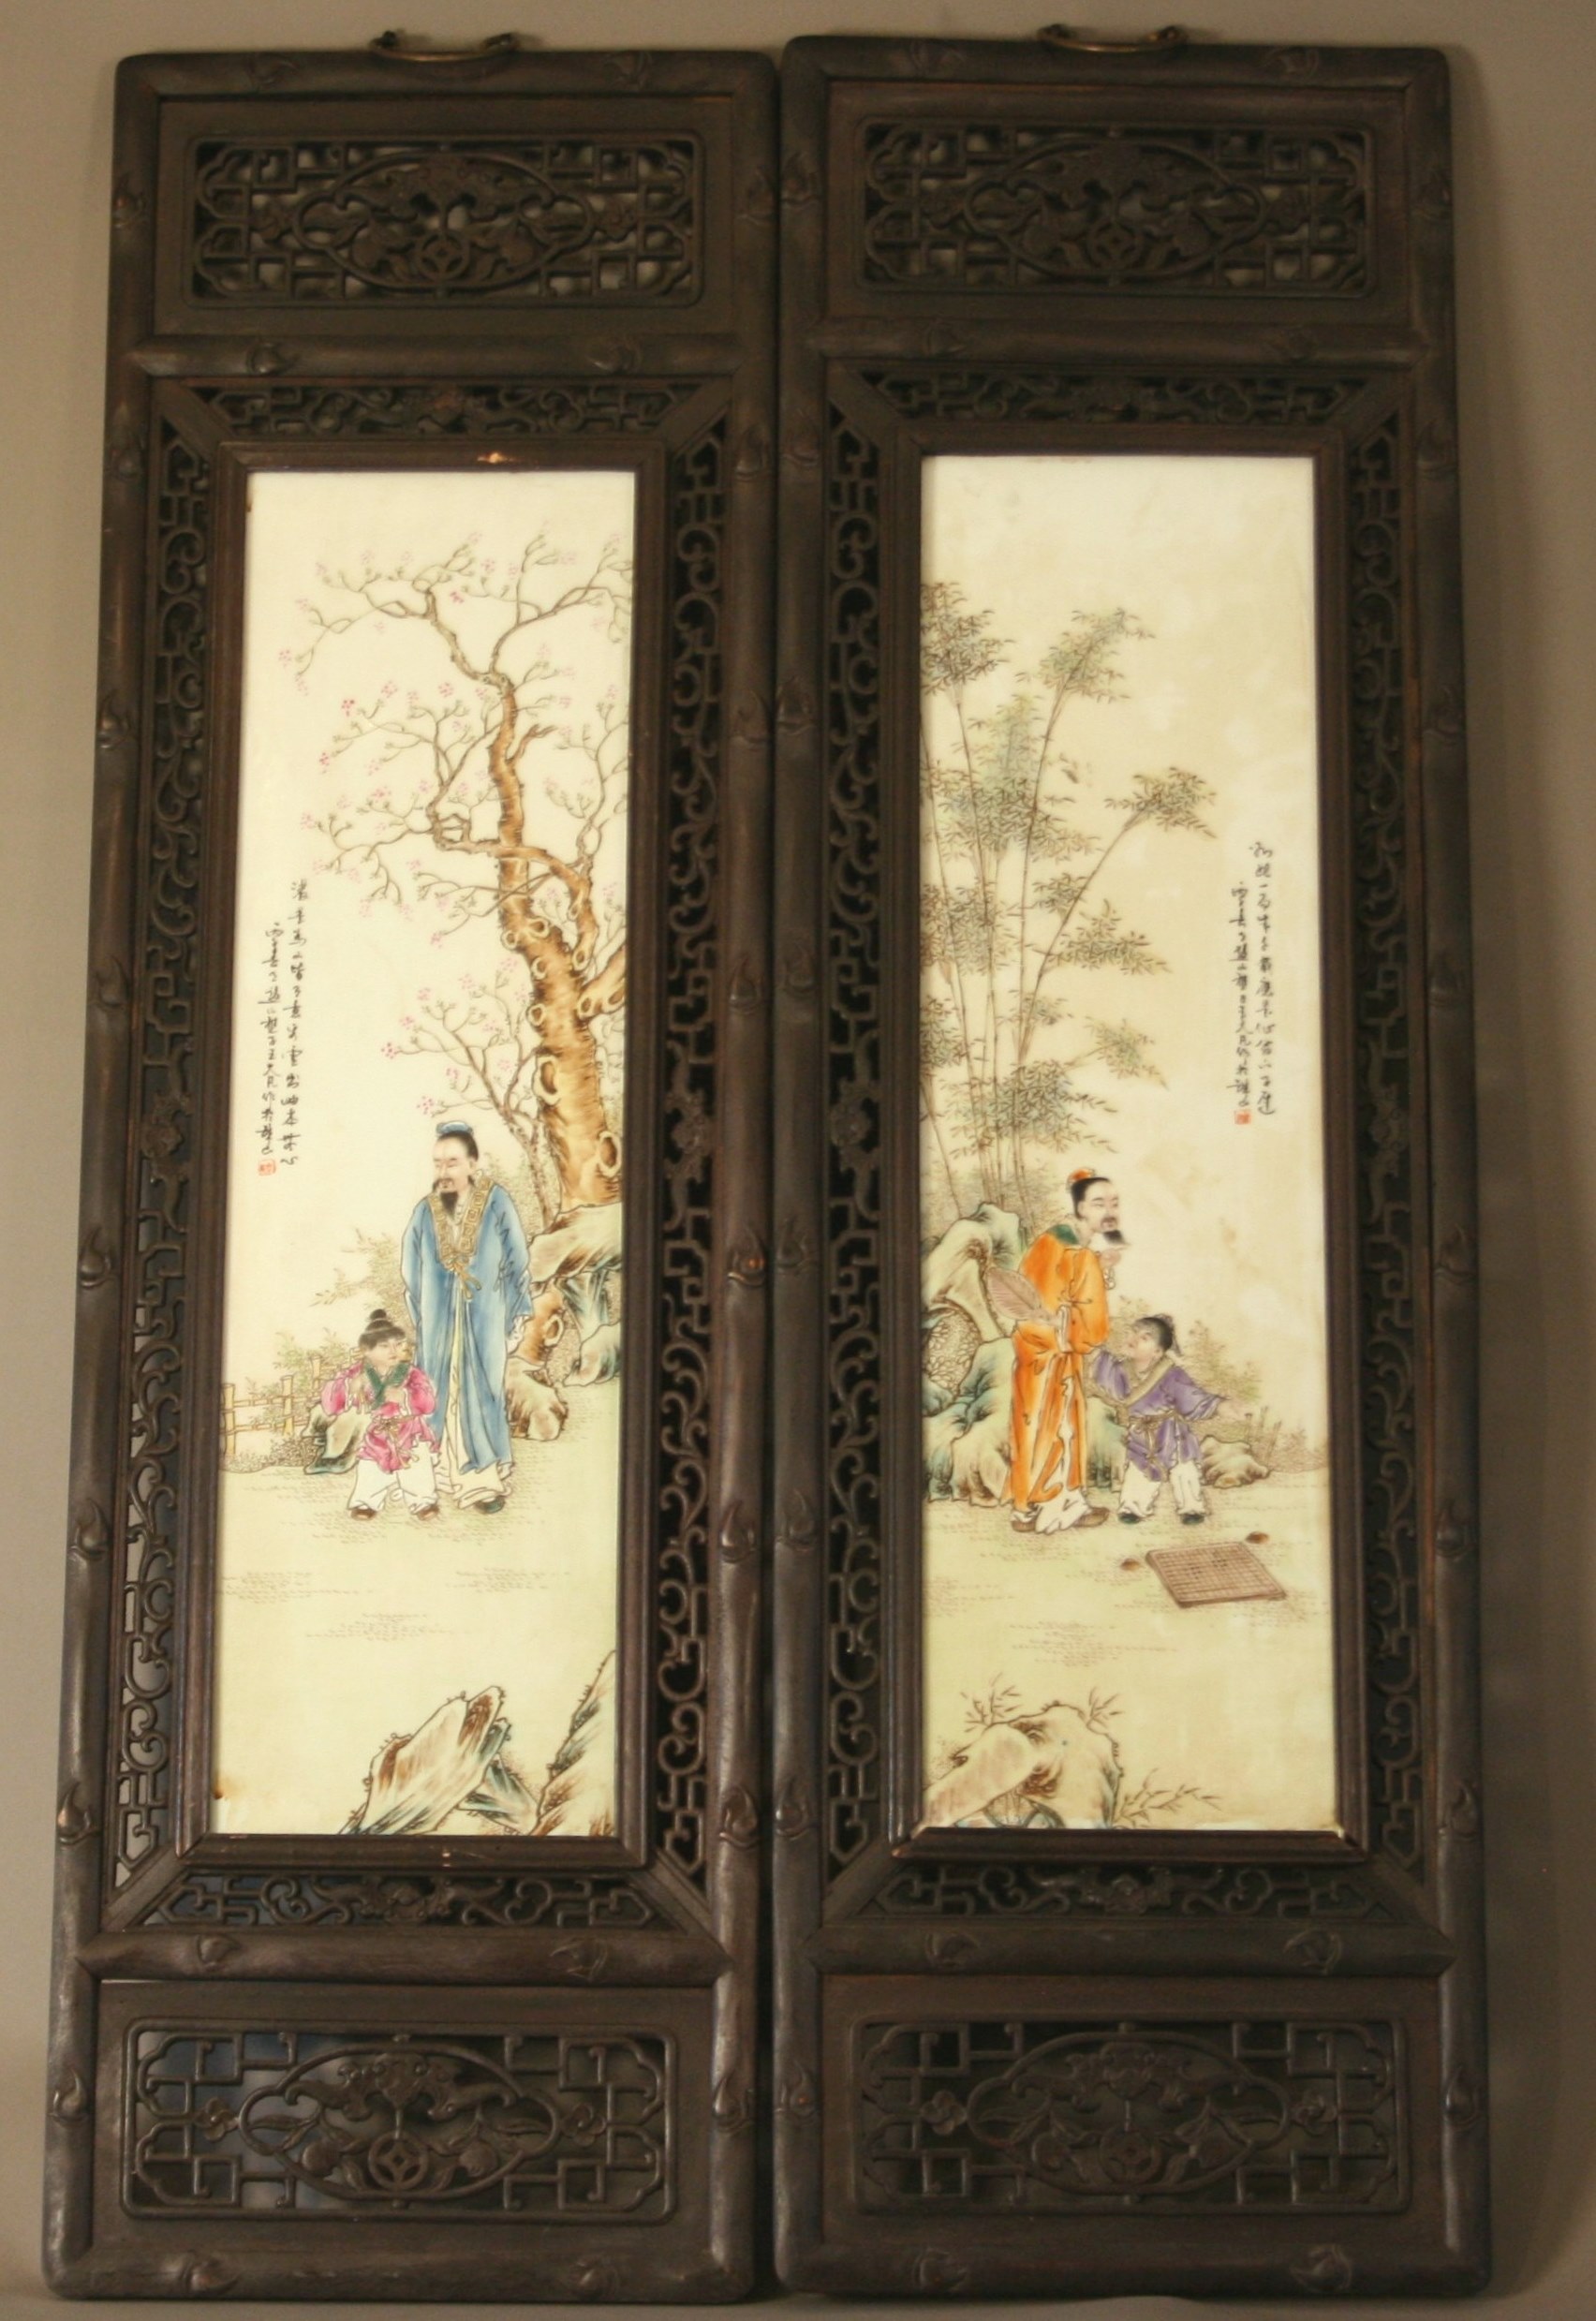 A Fine Set of Four Japanese Porcelain Hanging Panels. Meiji period (1868-1912). Each decorated